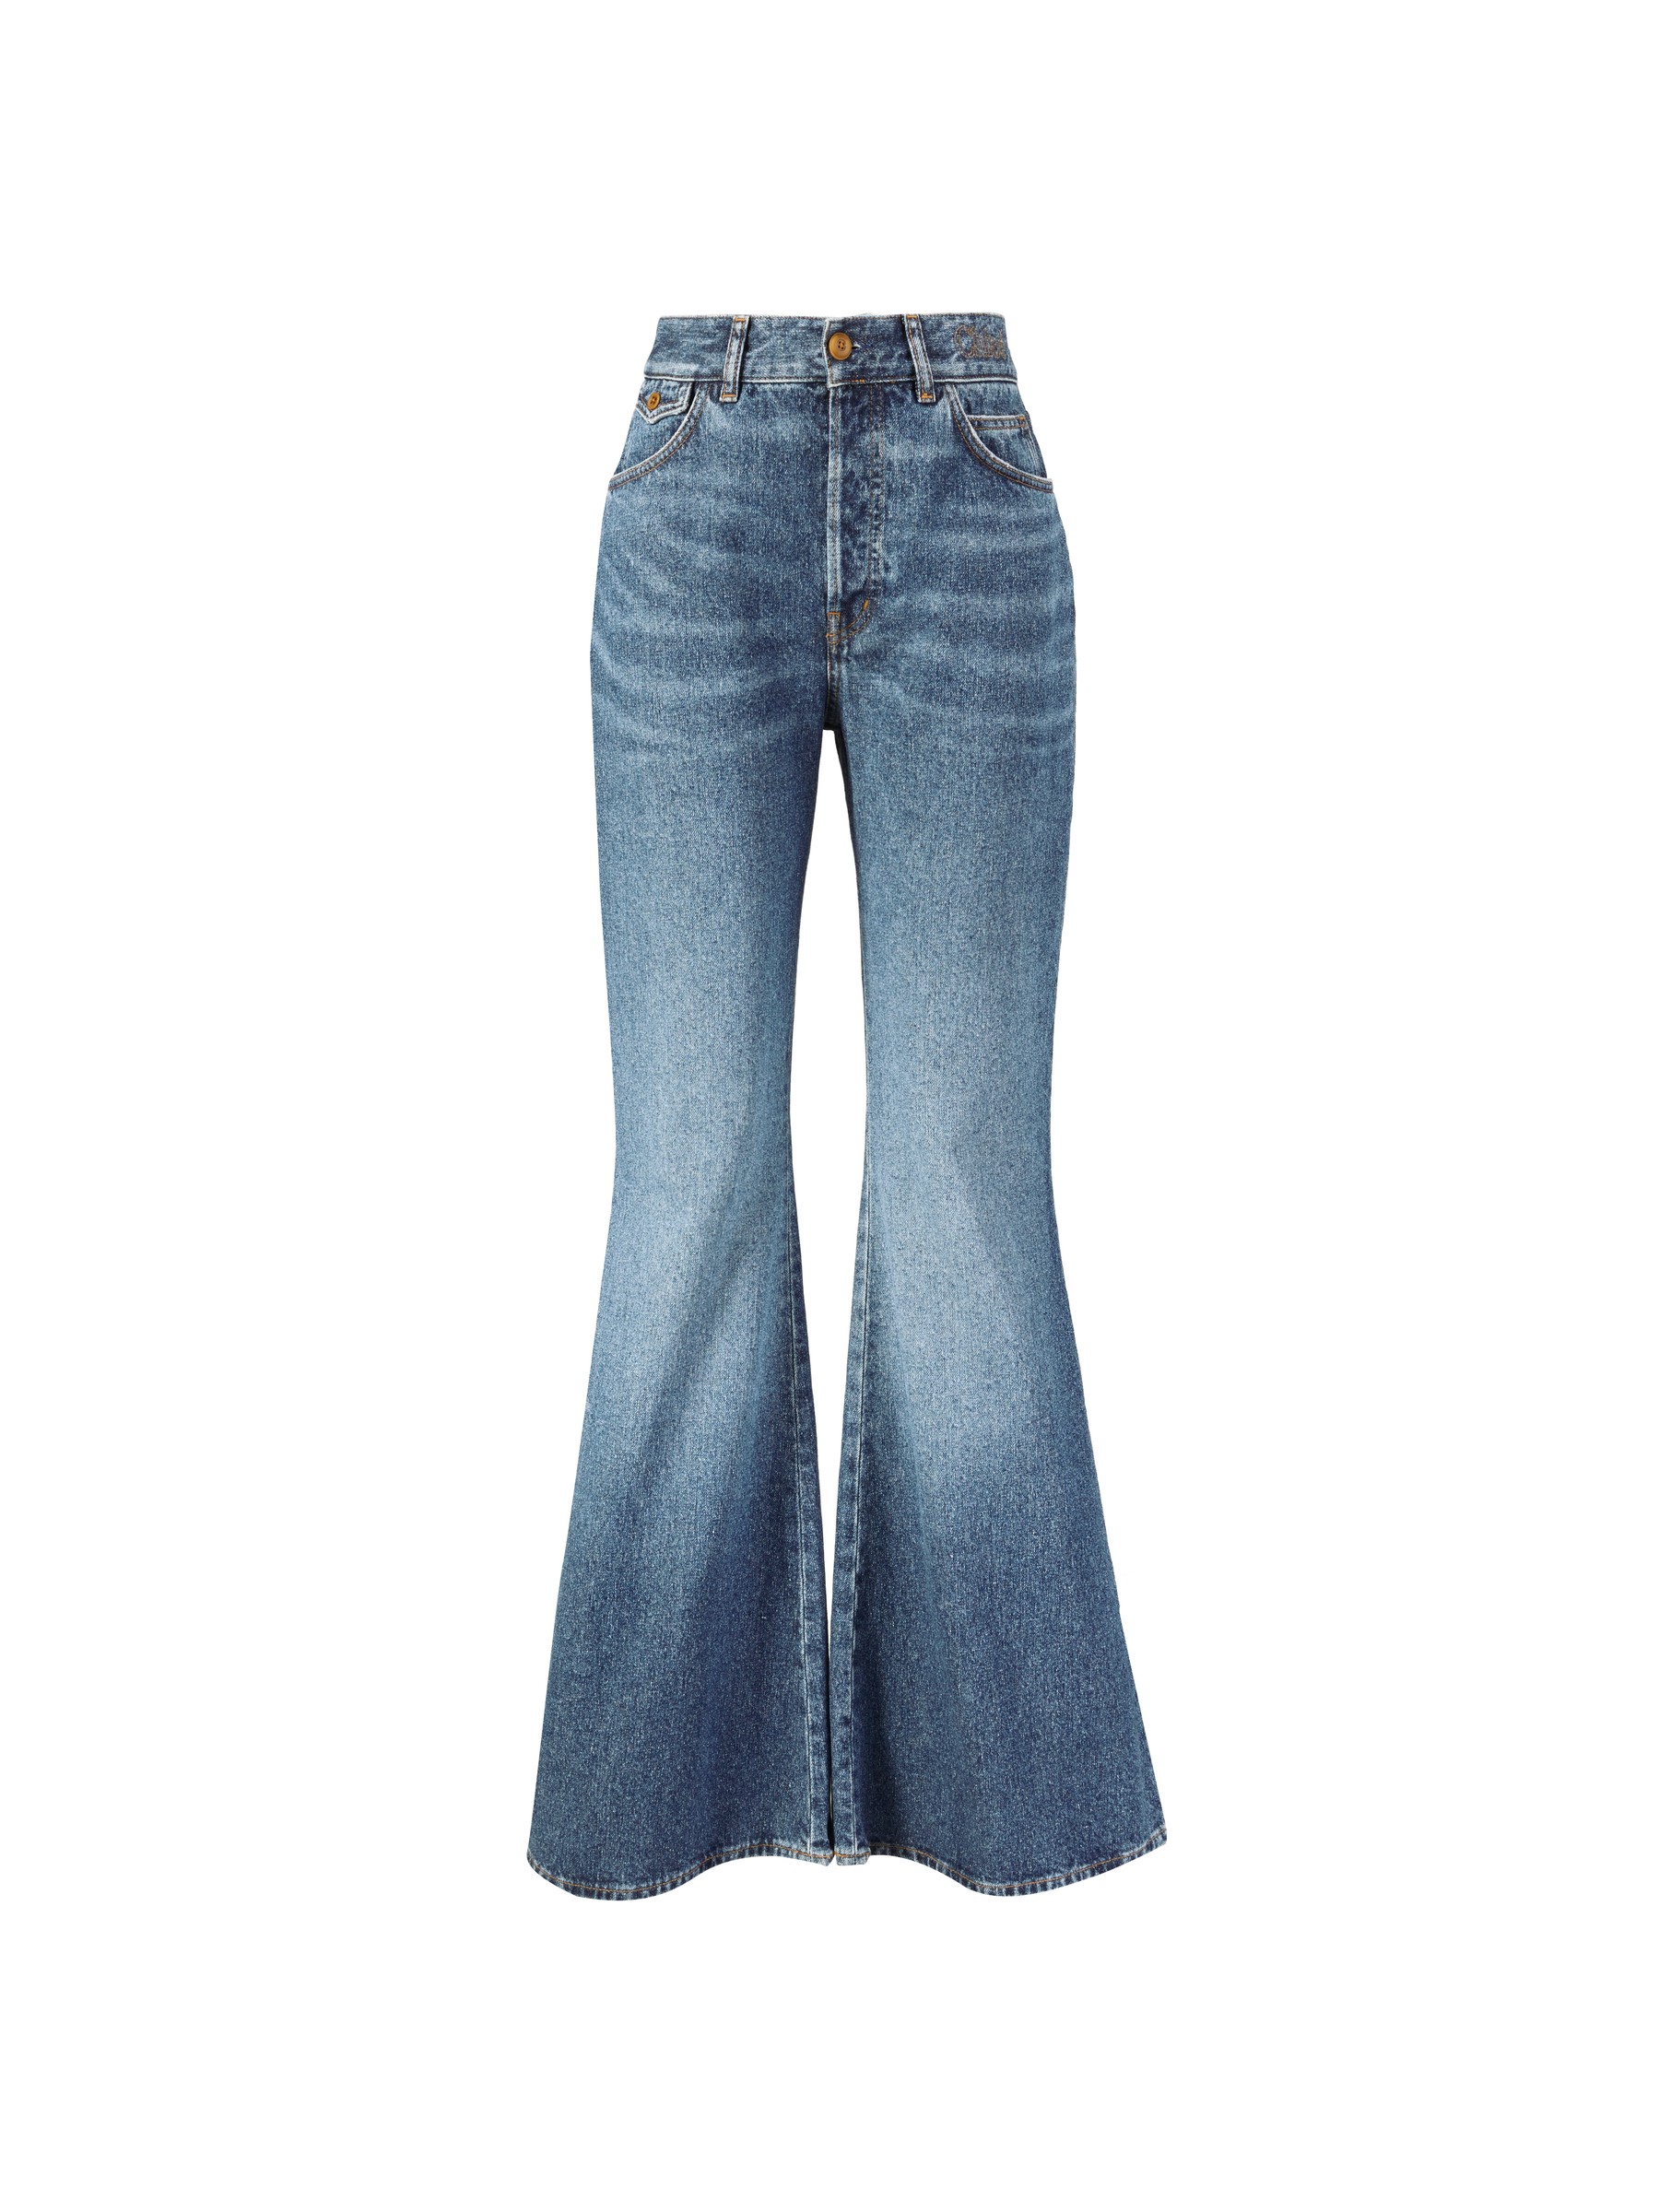 See By Chloé Denim See By Chloe High-rise Flared Jeans in Blue Womens Clothing Jeans Flare and bell bottom jeans 